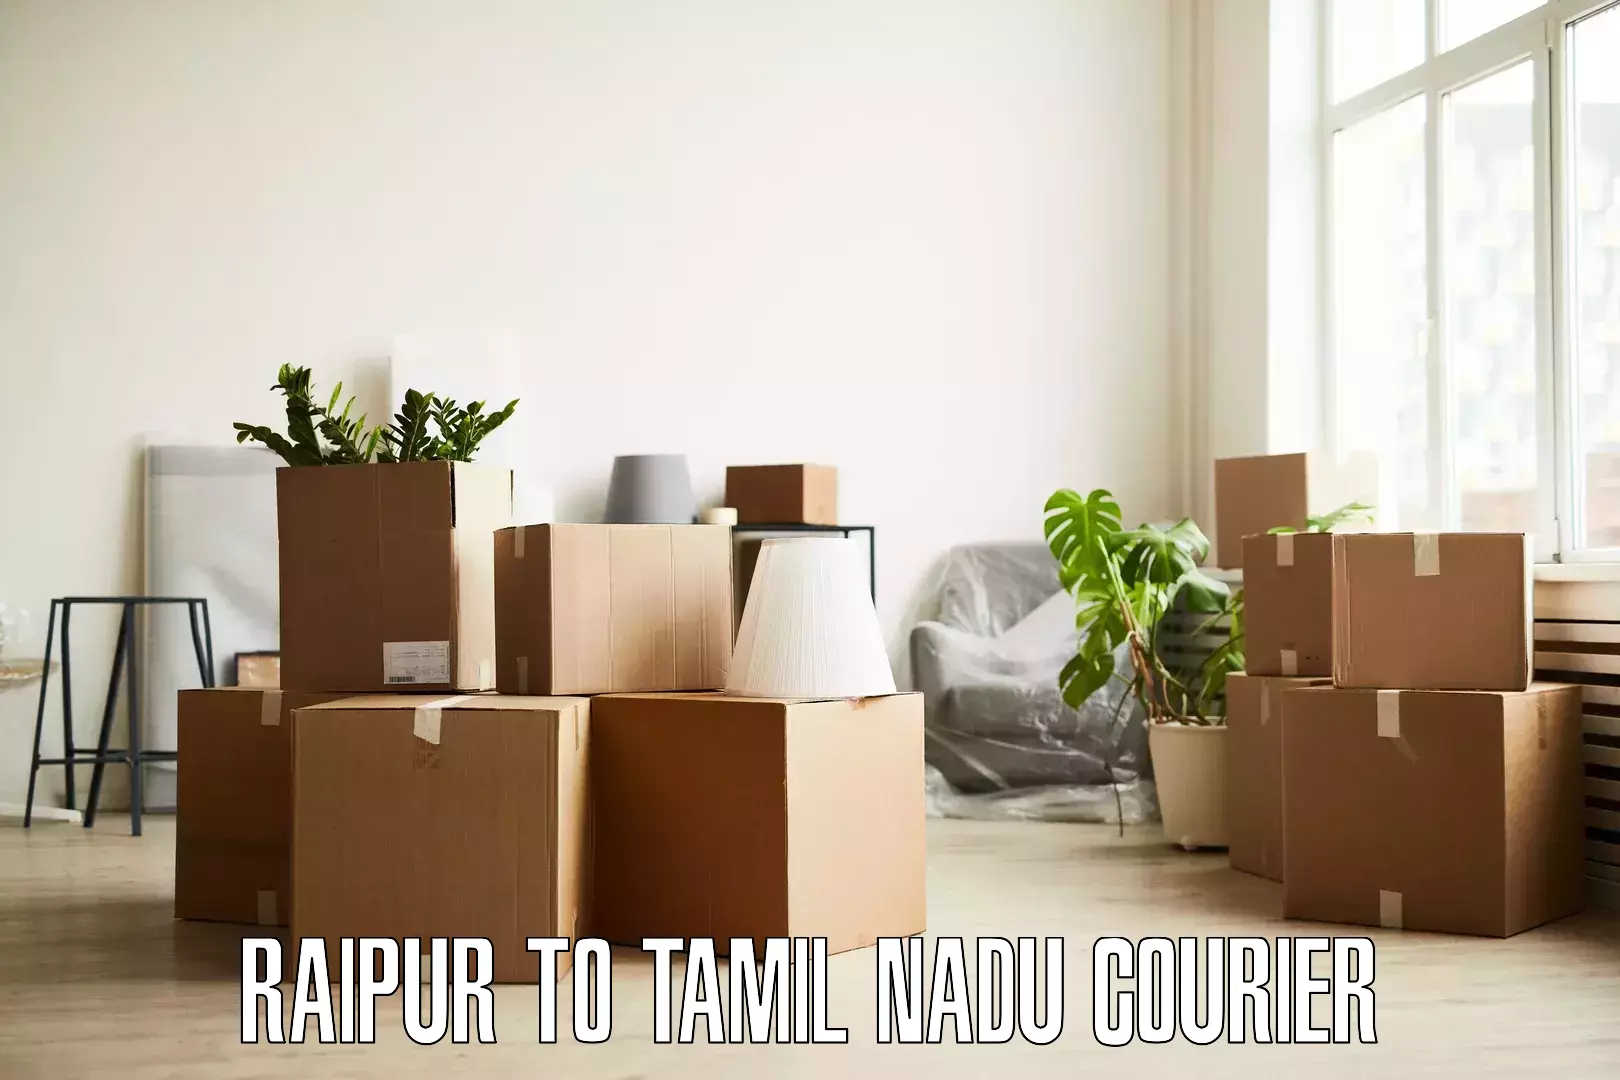 Trusted relocation experts Raipur to Tamil Nadu